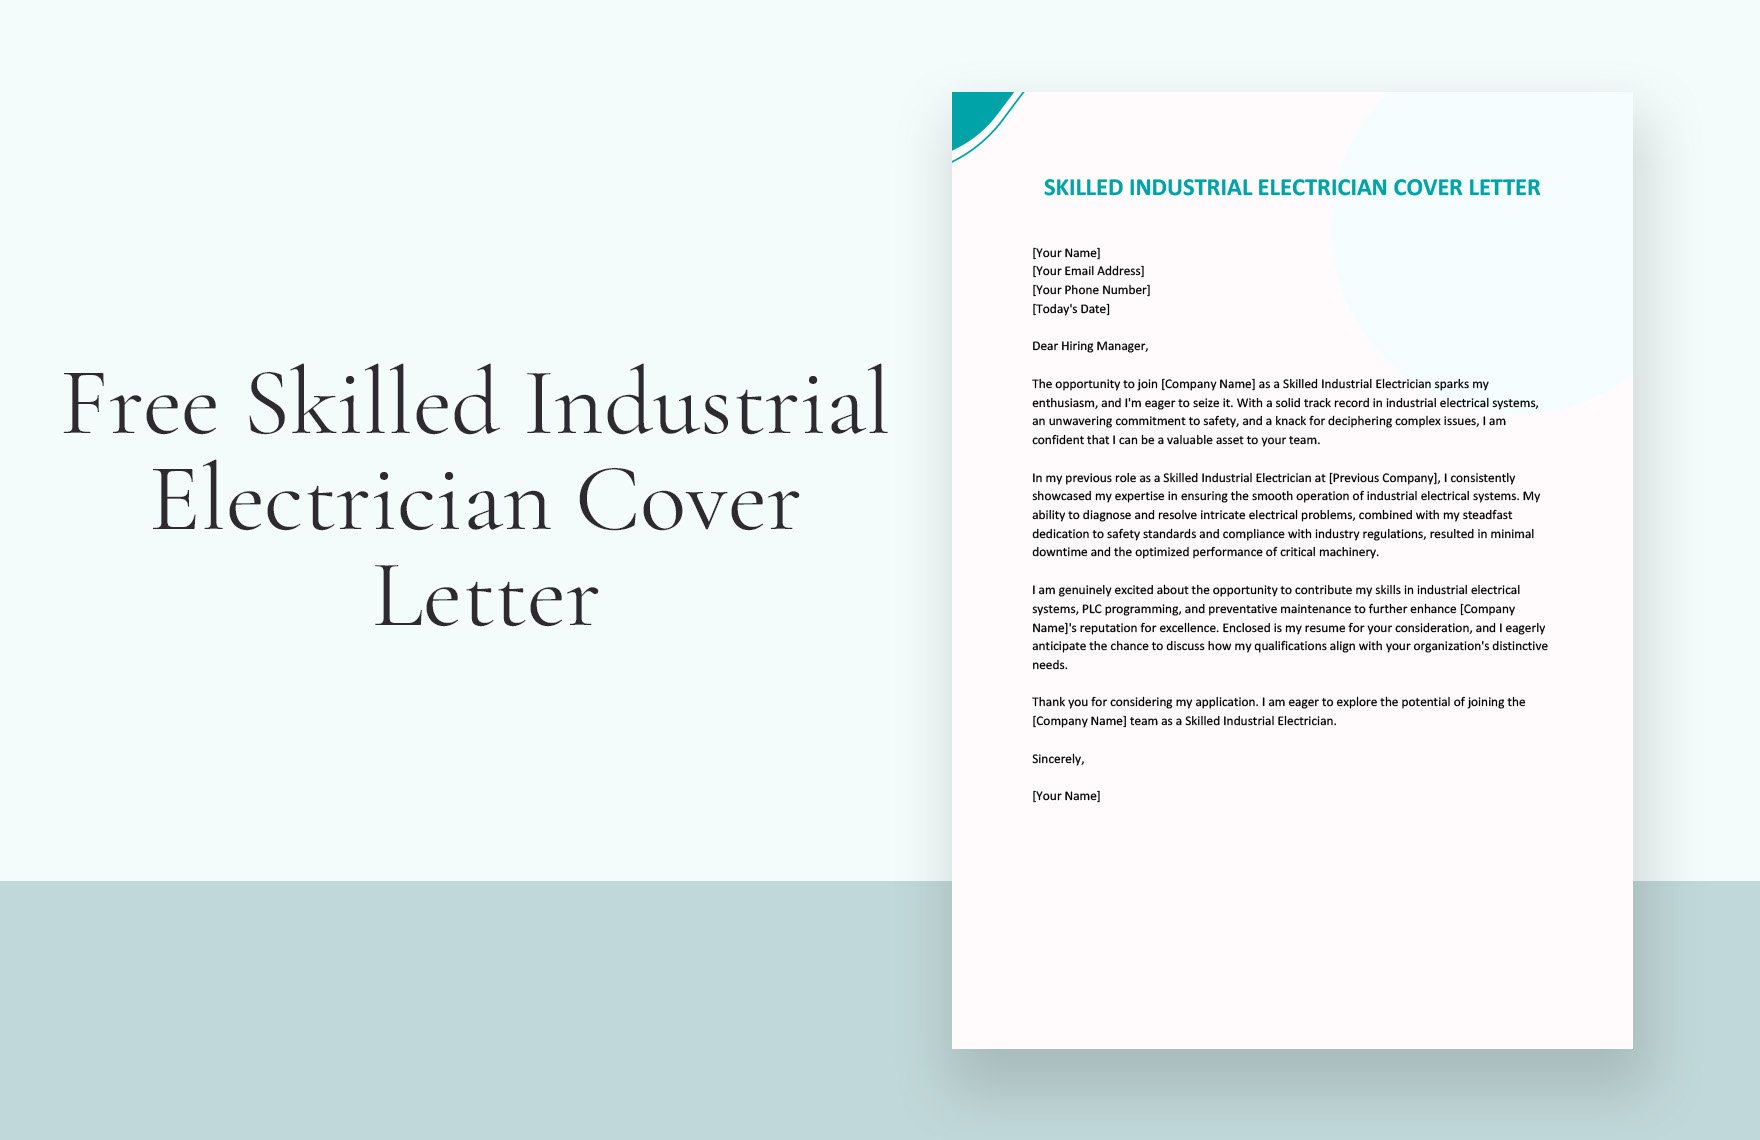 Skilled Industrial Electrician Cover Letter